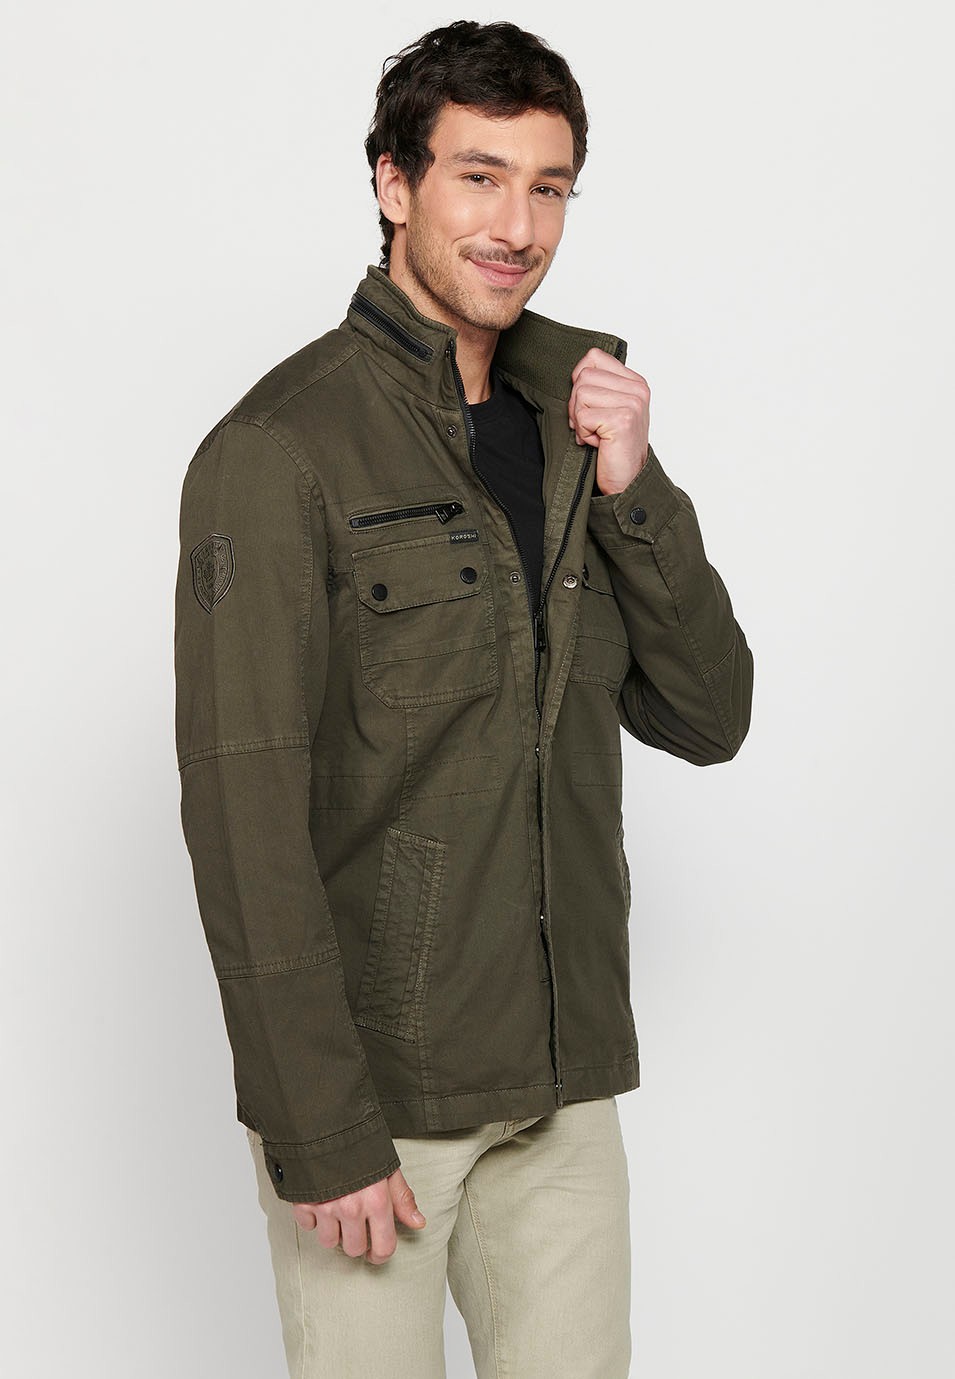 Long Jacket with Zipper Front Closure and Lapel with Stand Collar and Flap Pockets in Olive Color for Men 4